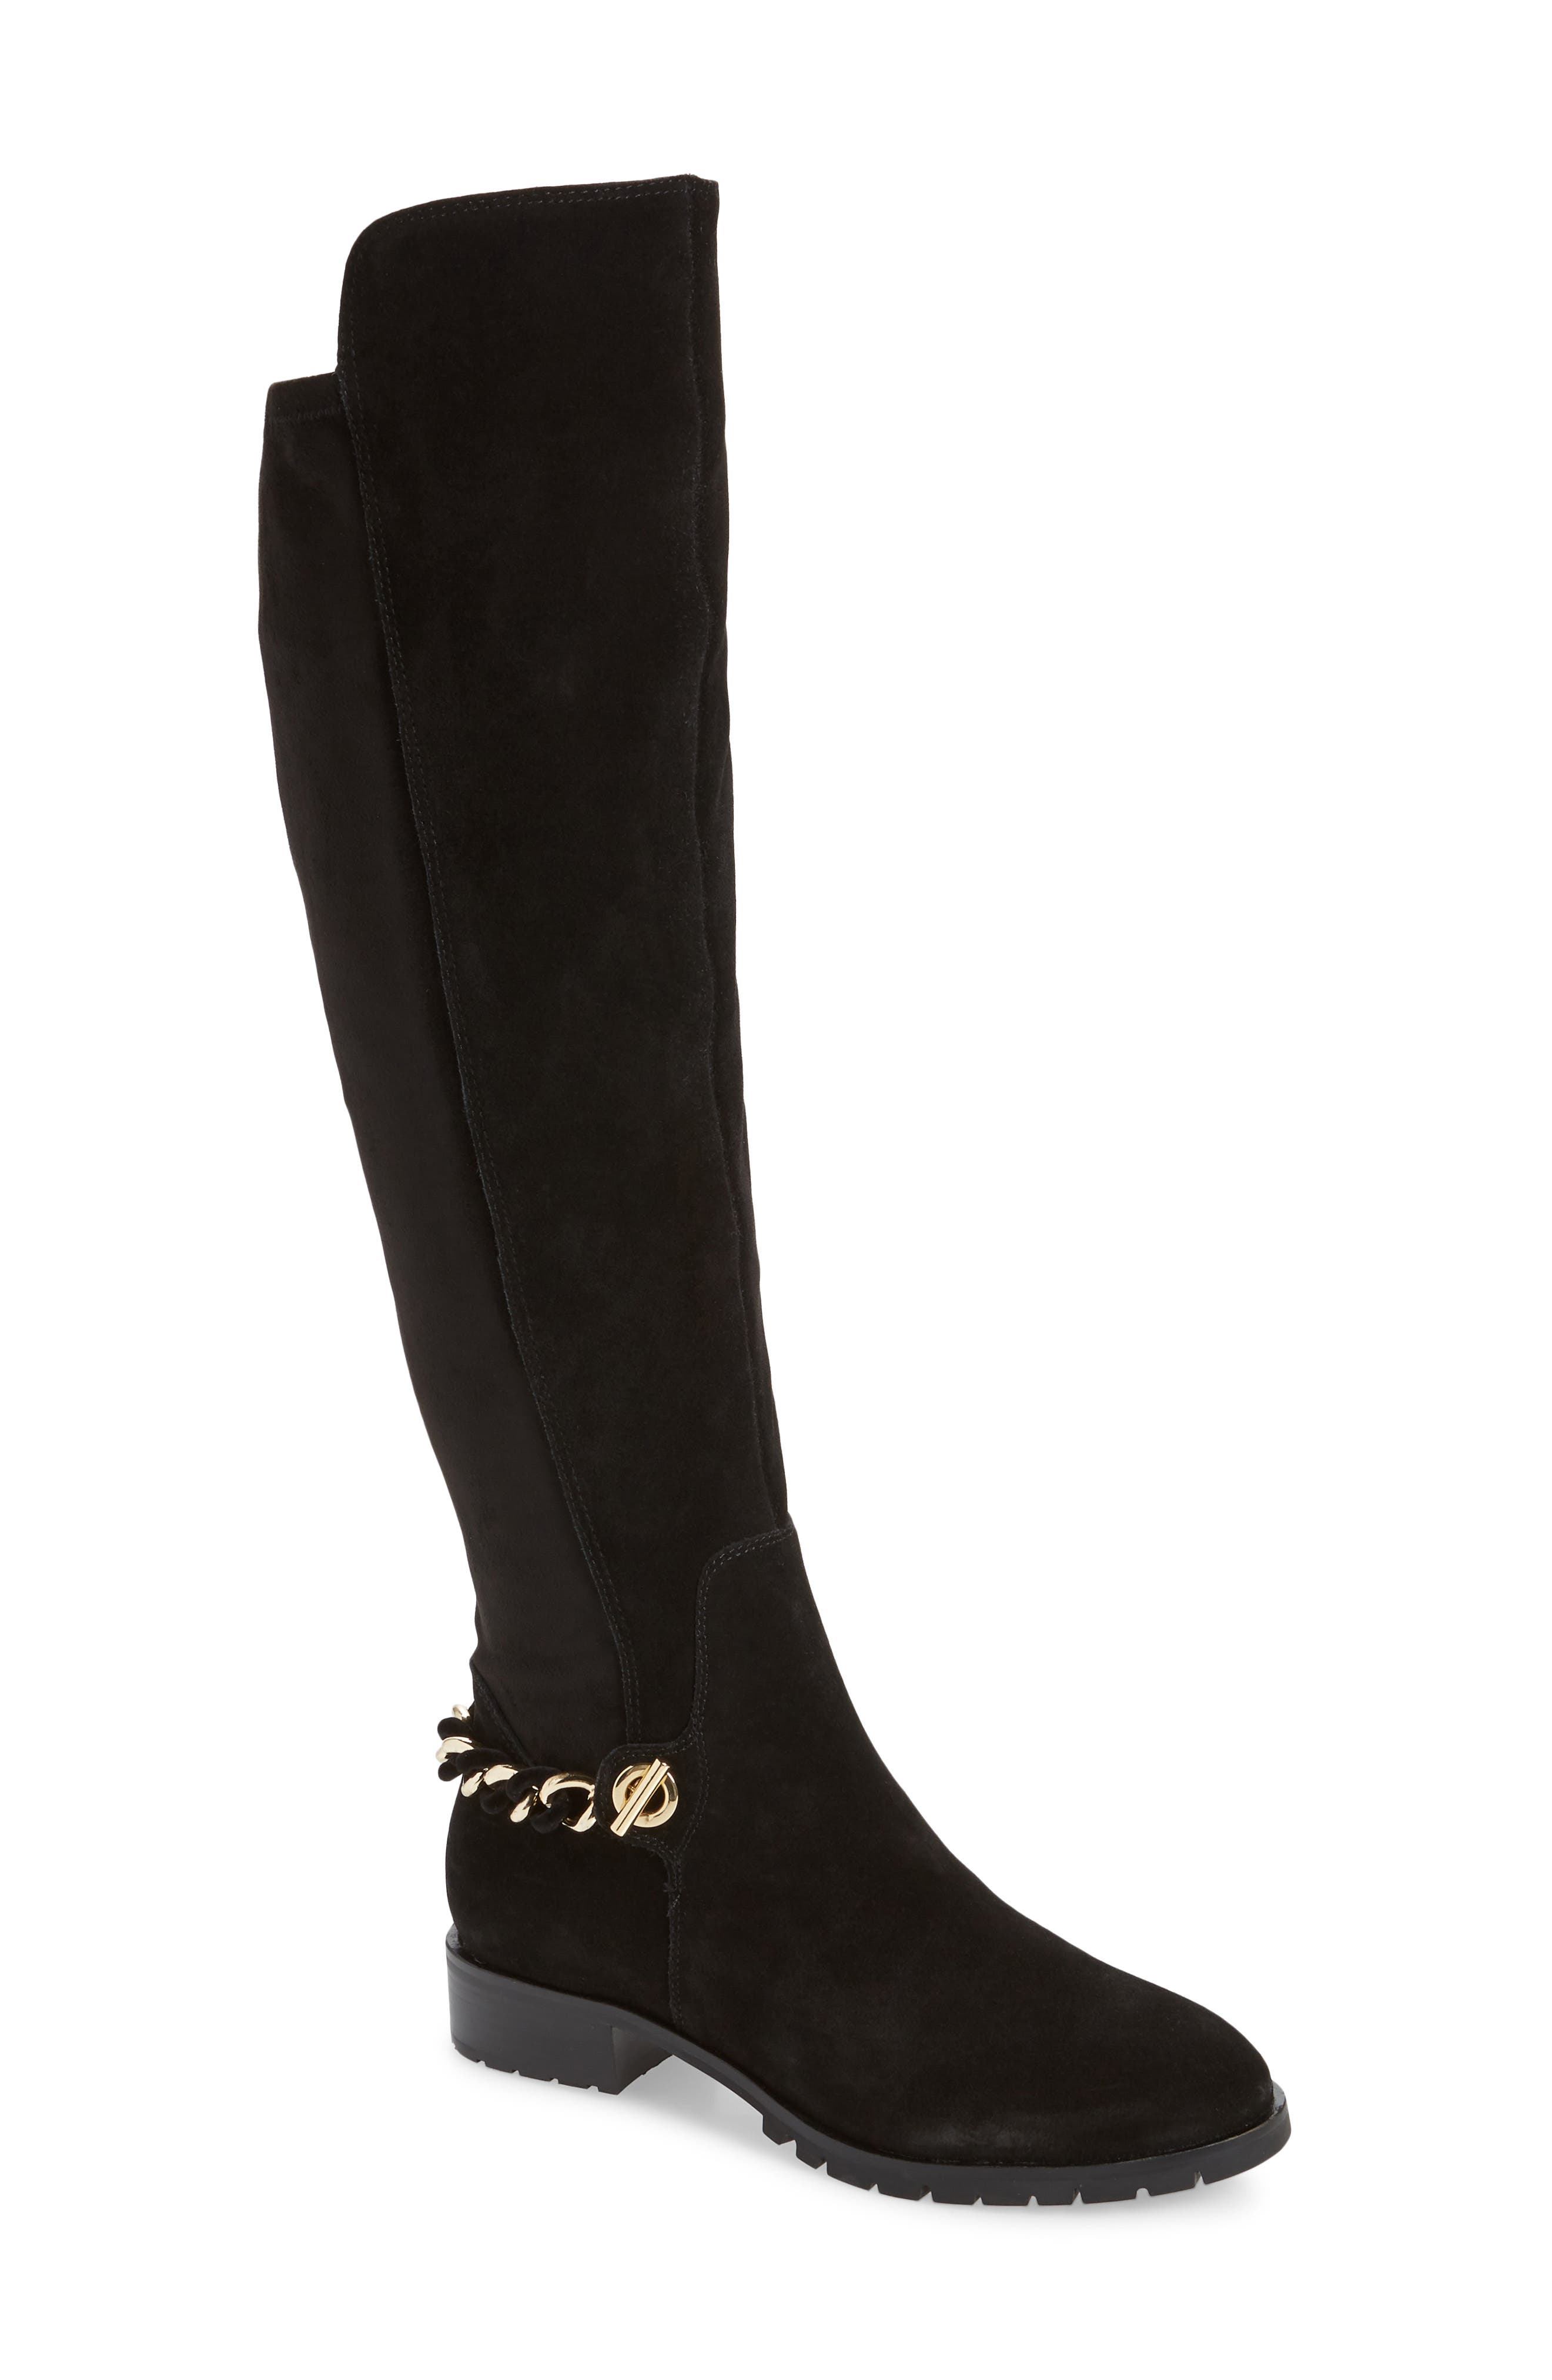 karl lagerfeld over the knee boots